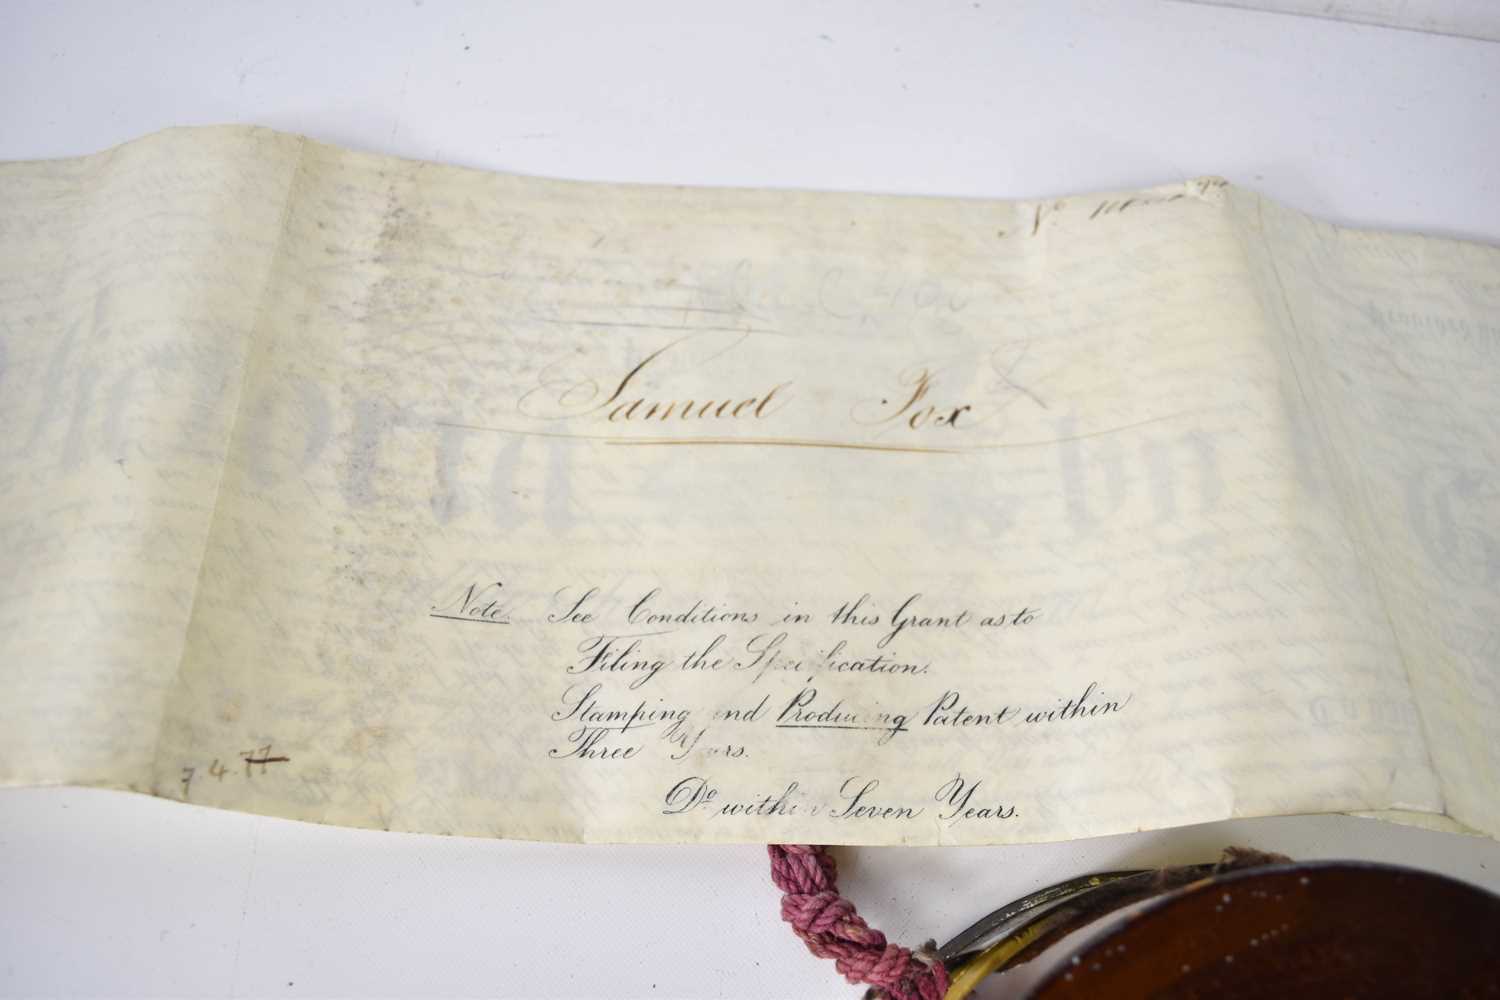 A Royal Warrant of Patent, hand written on vellum and granted to Samuel Fox of The Stocksbridge - Image 7 of 8